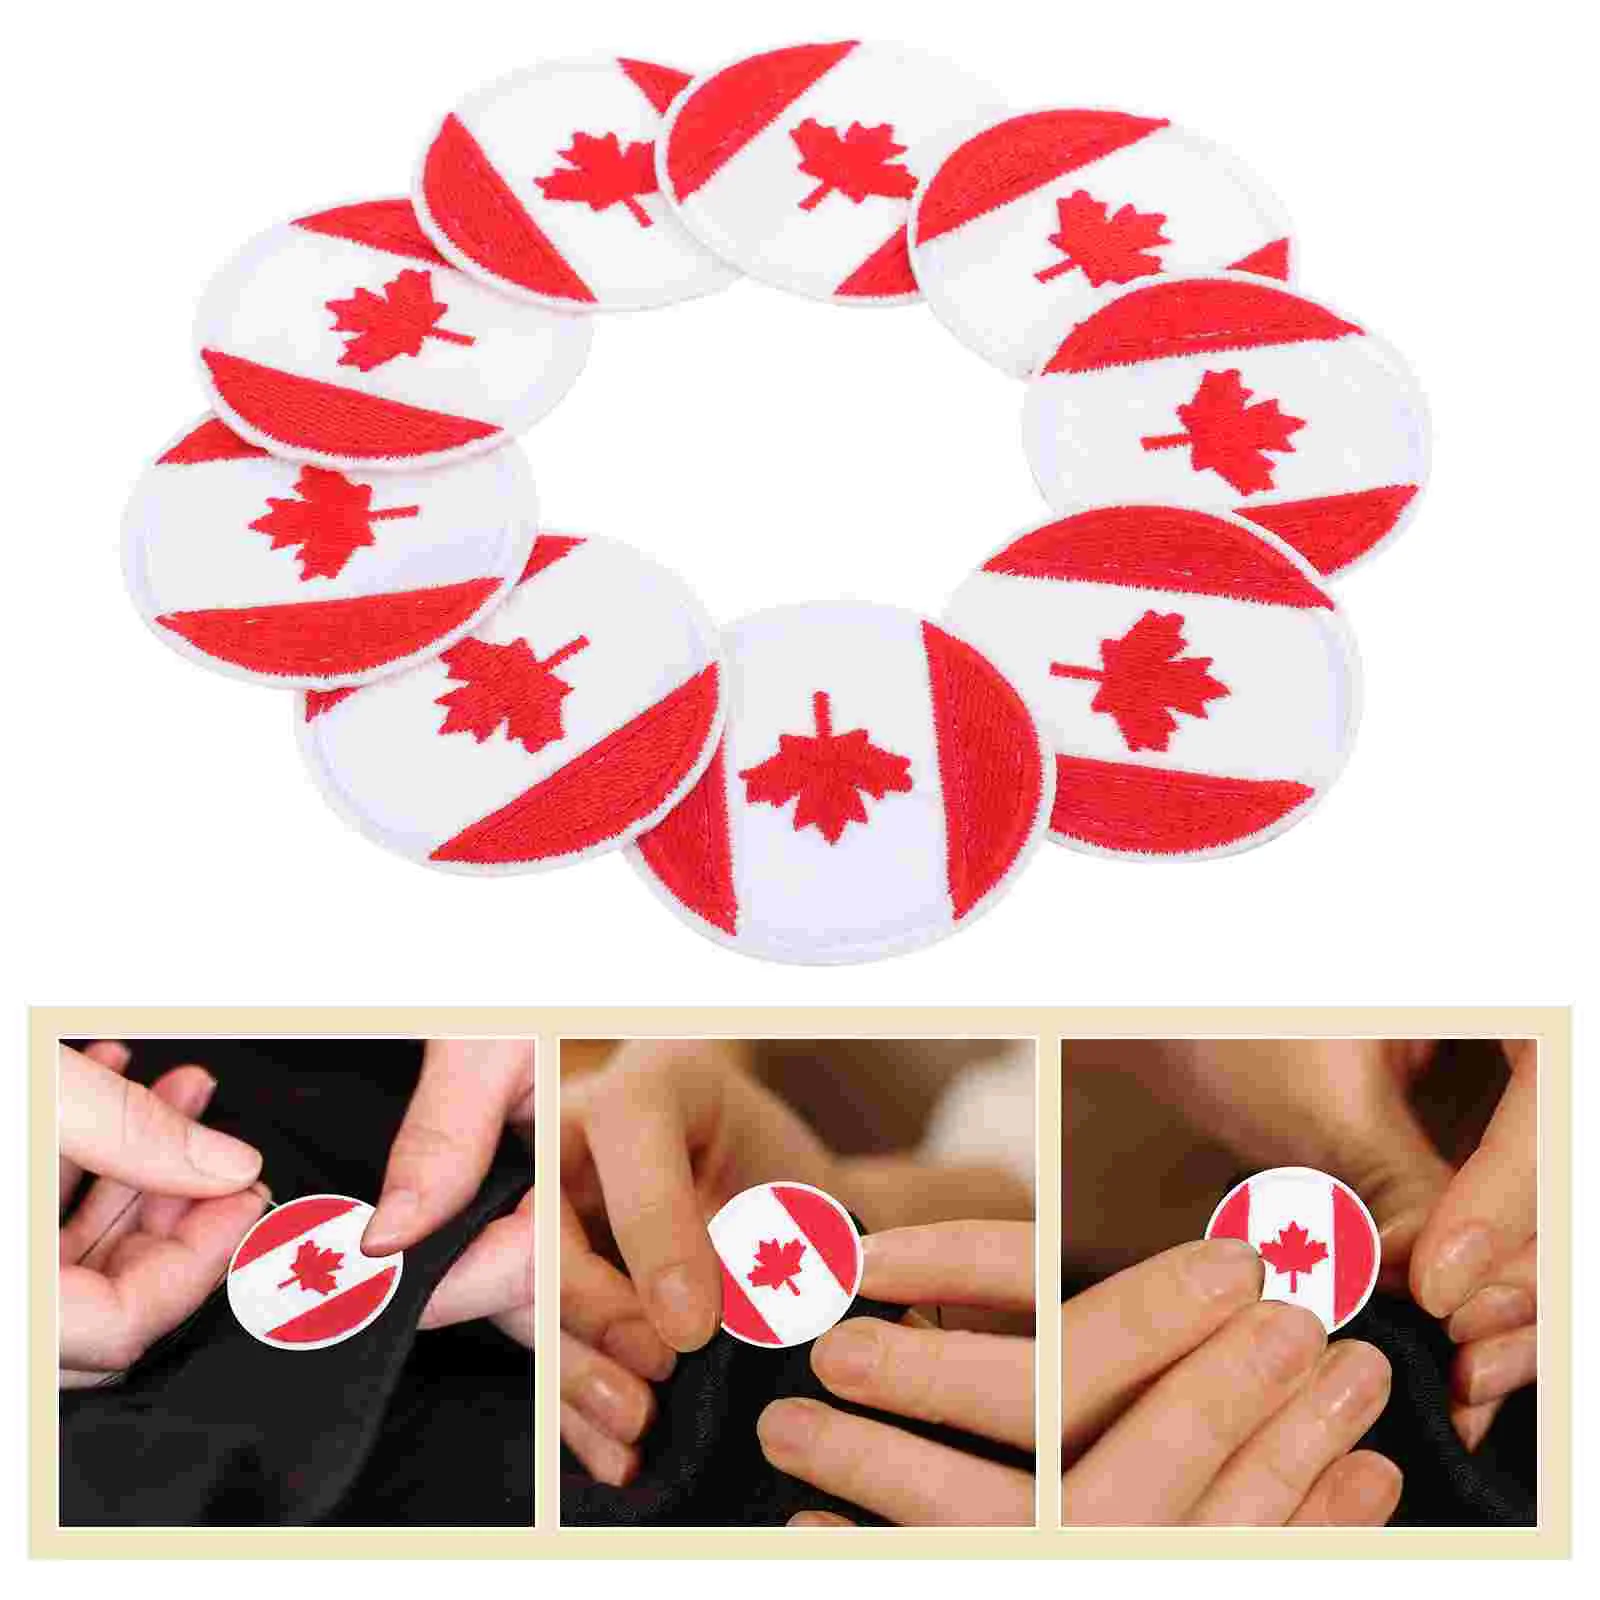 

12pcs Round National Flag Clothes Patches Hole Repairing Patches Accessory Fashion Embroidery Applique